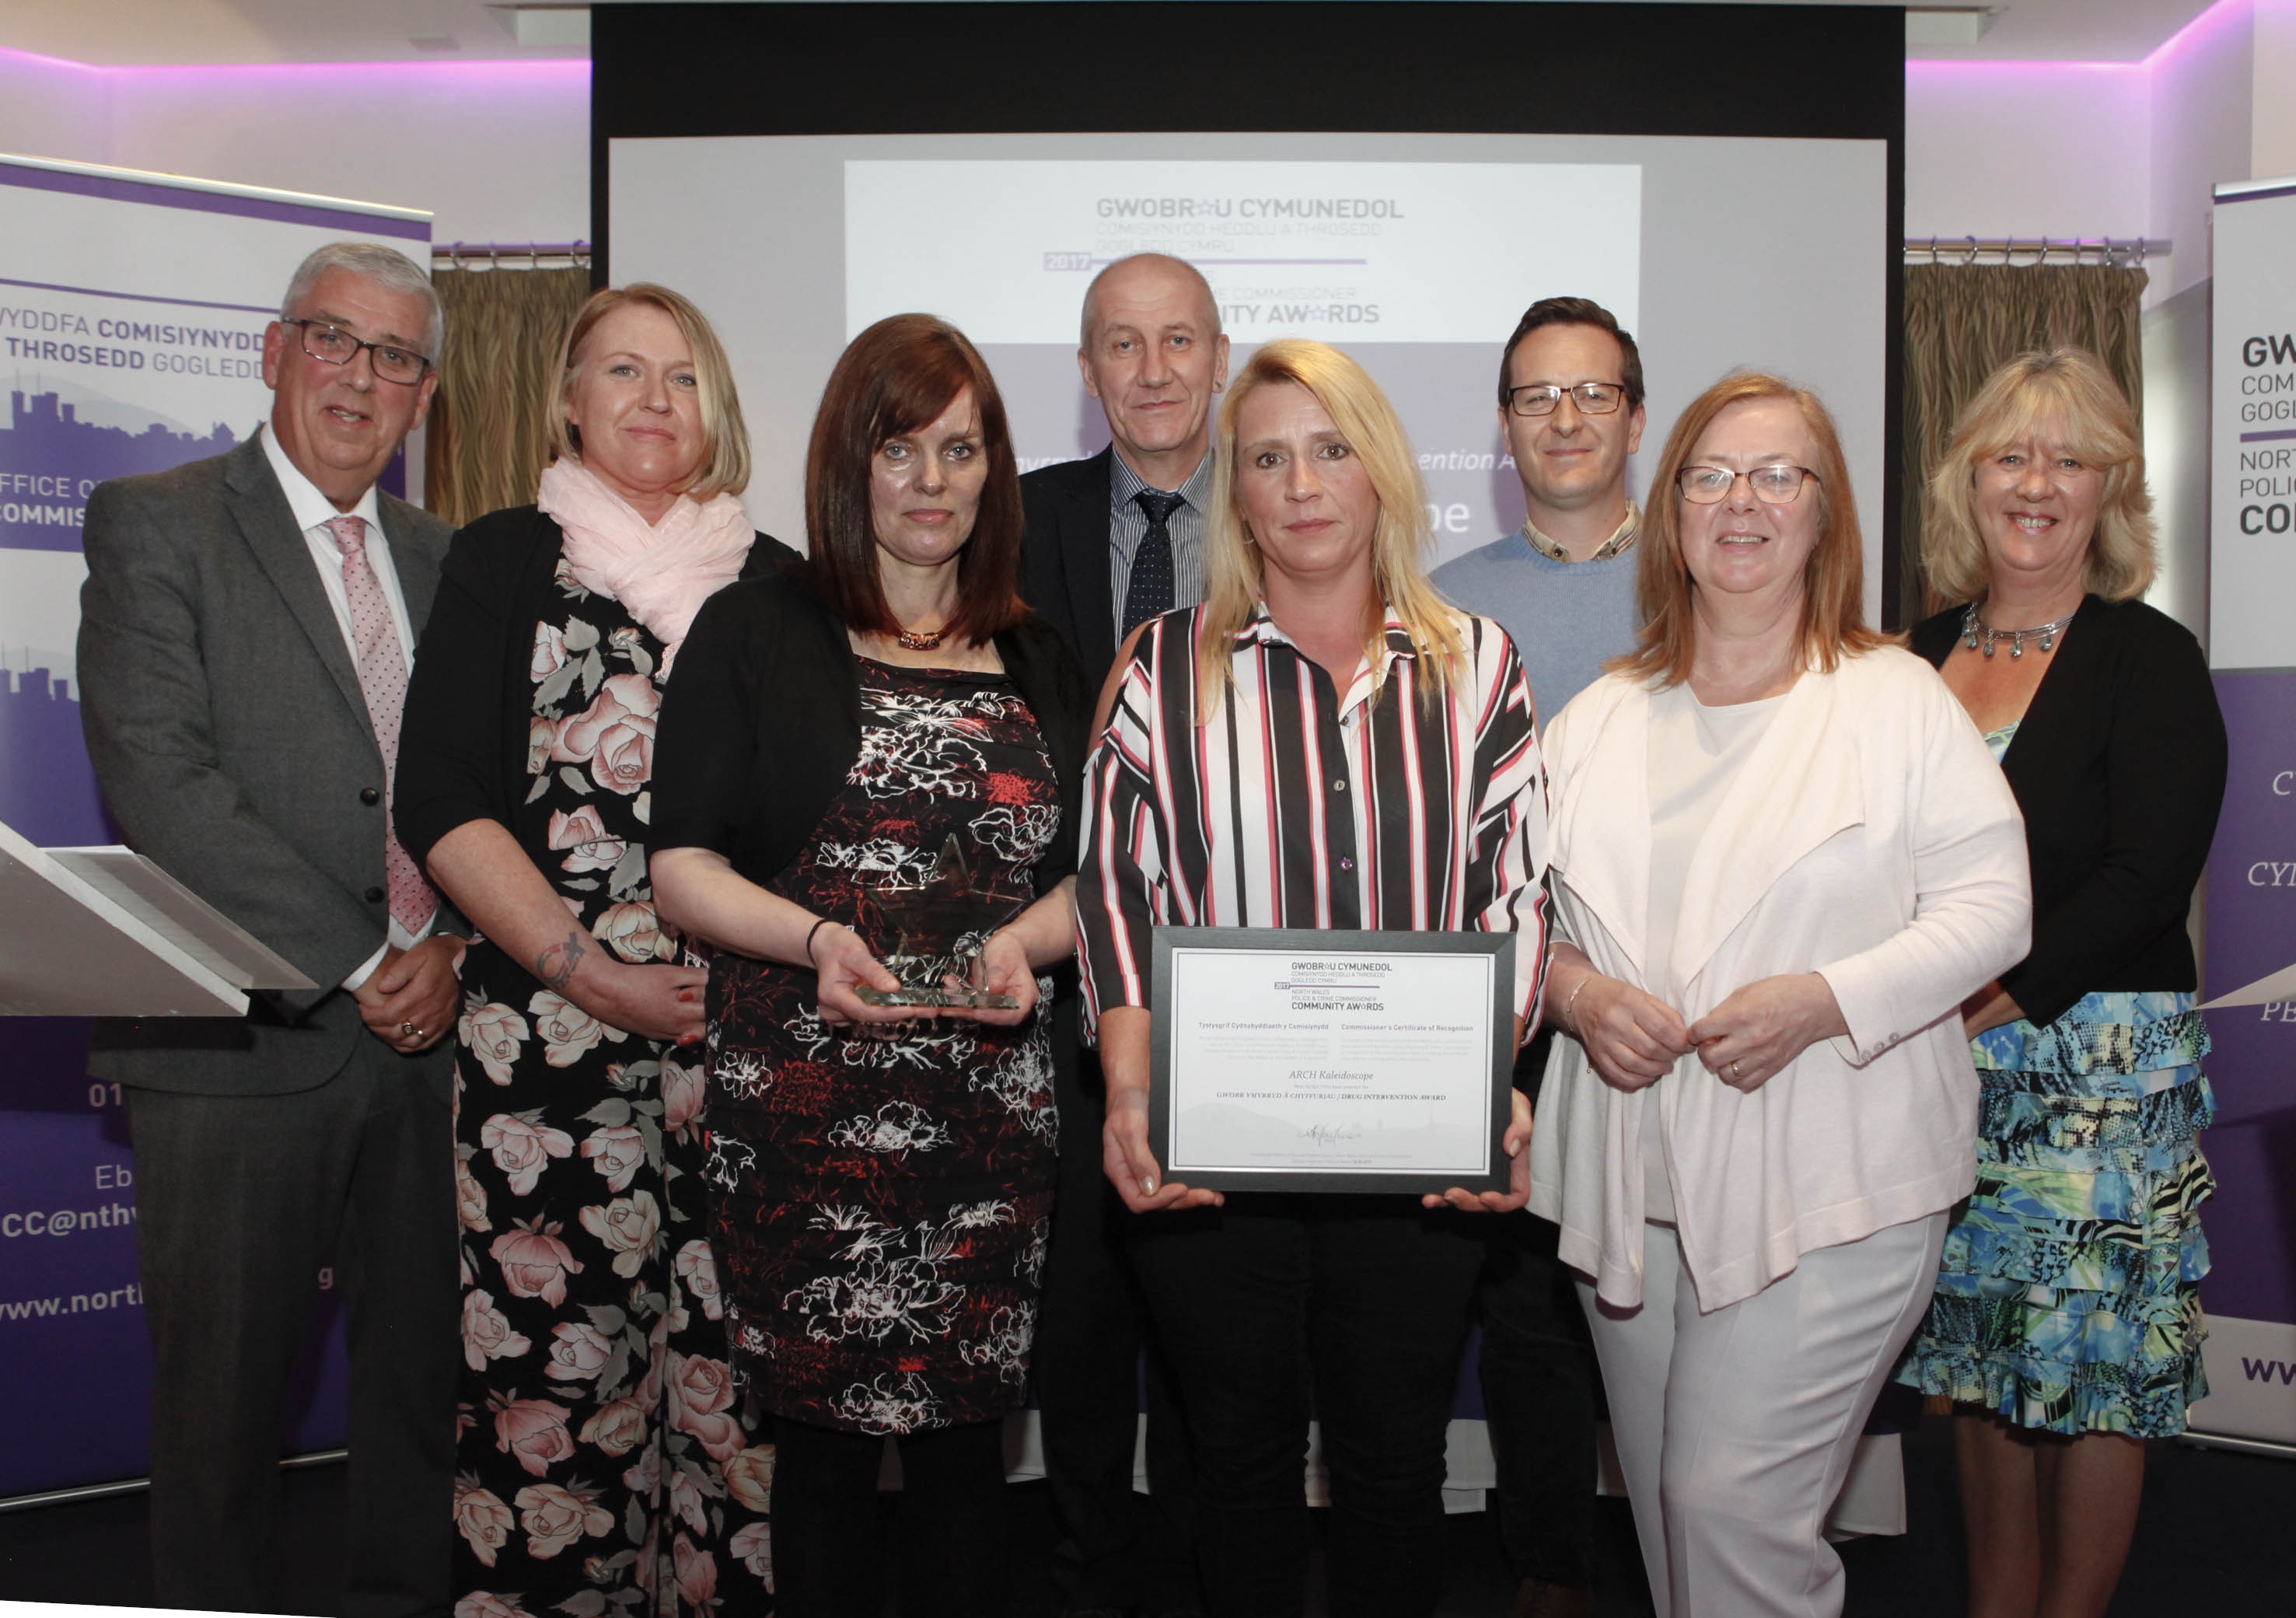 Dedicated team honoured for work with “vulnerable and broken people”